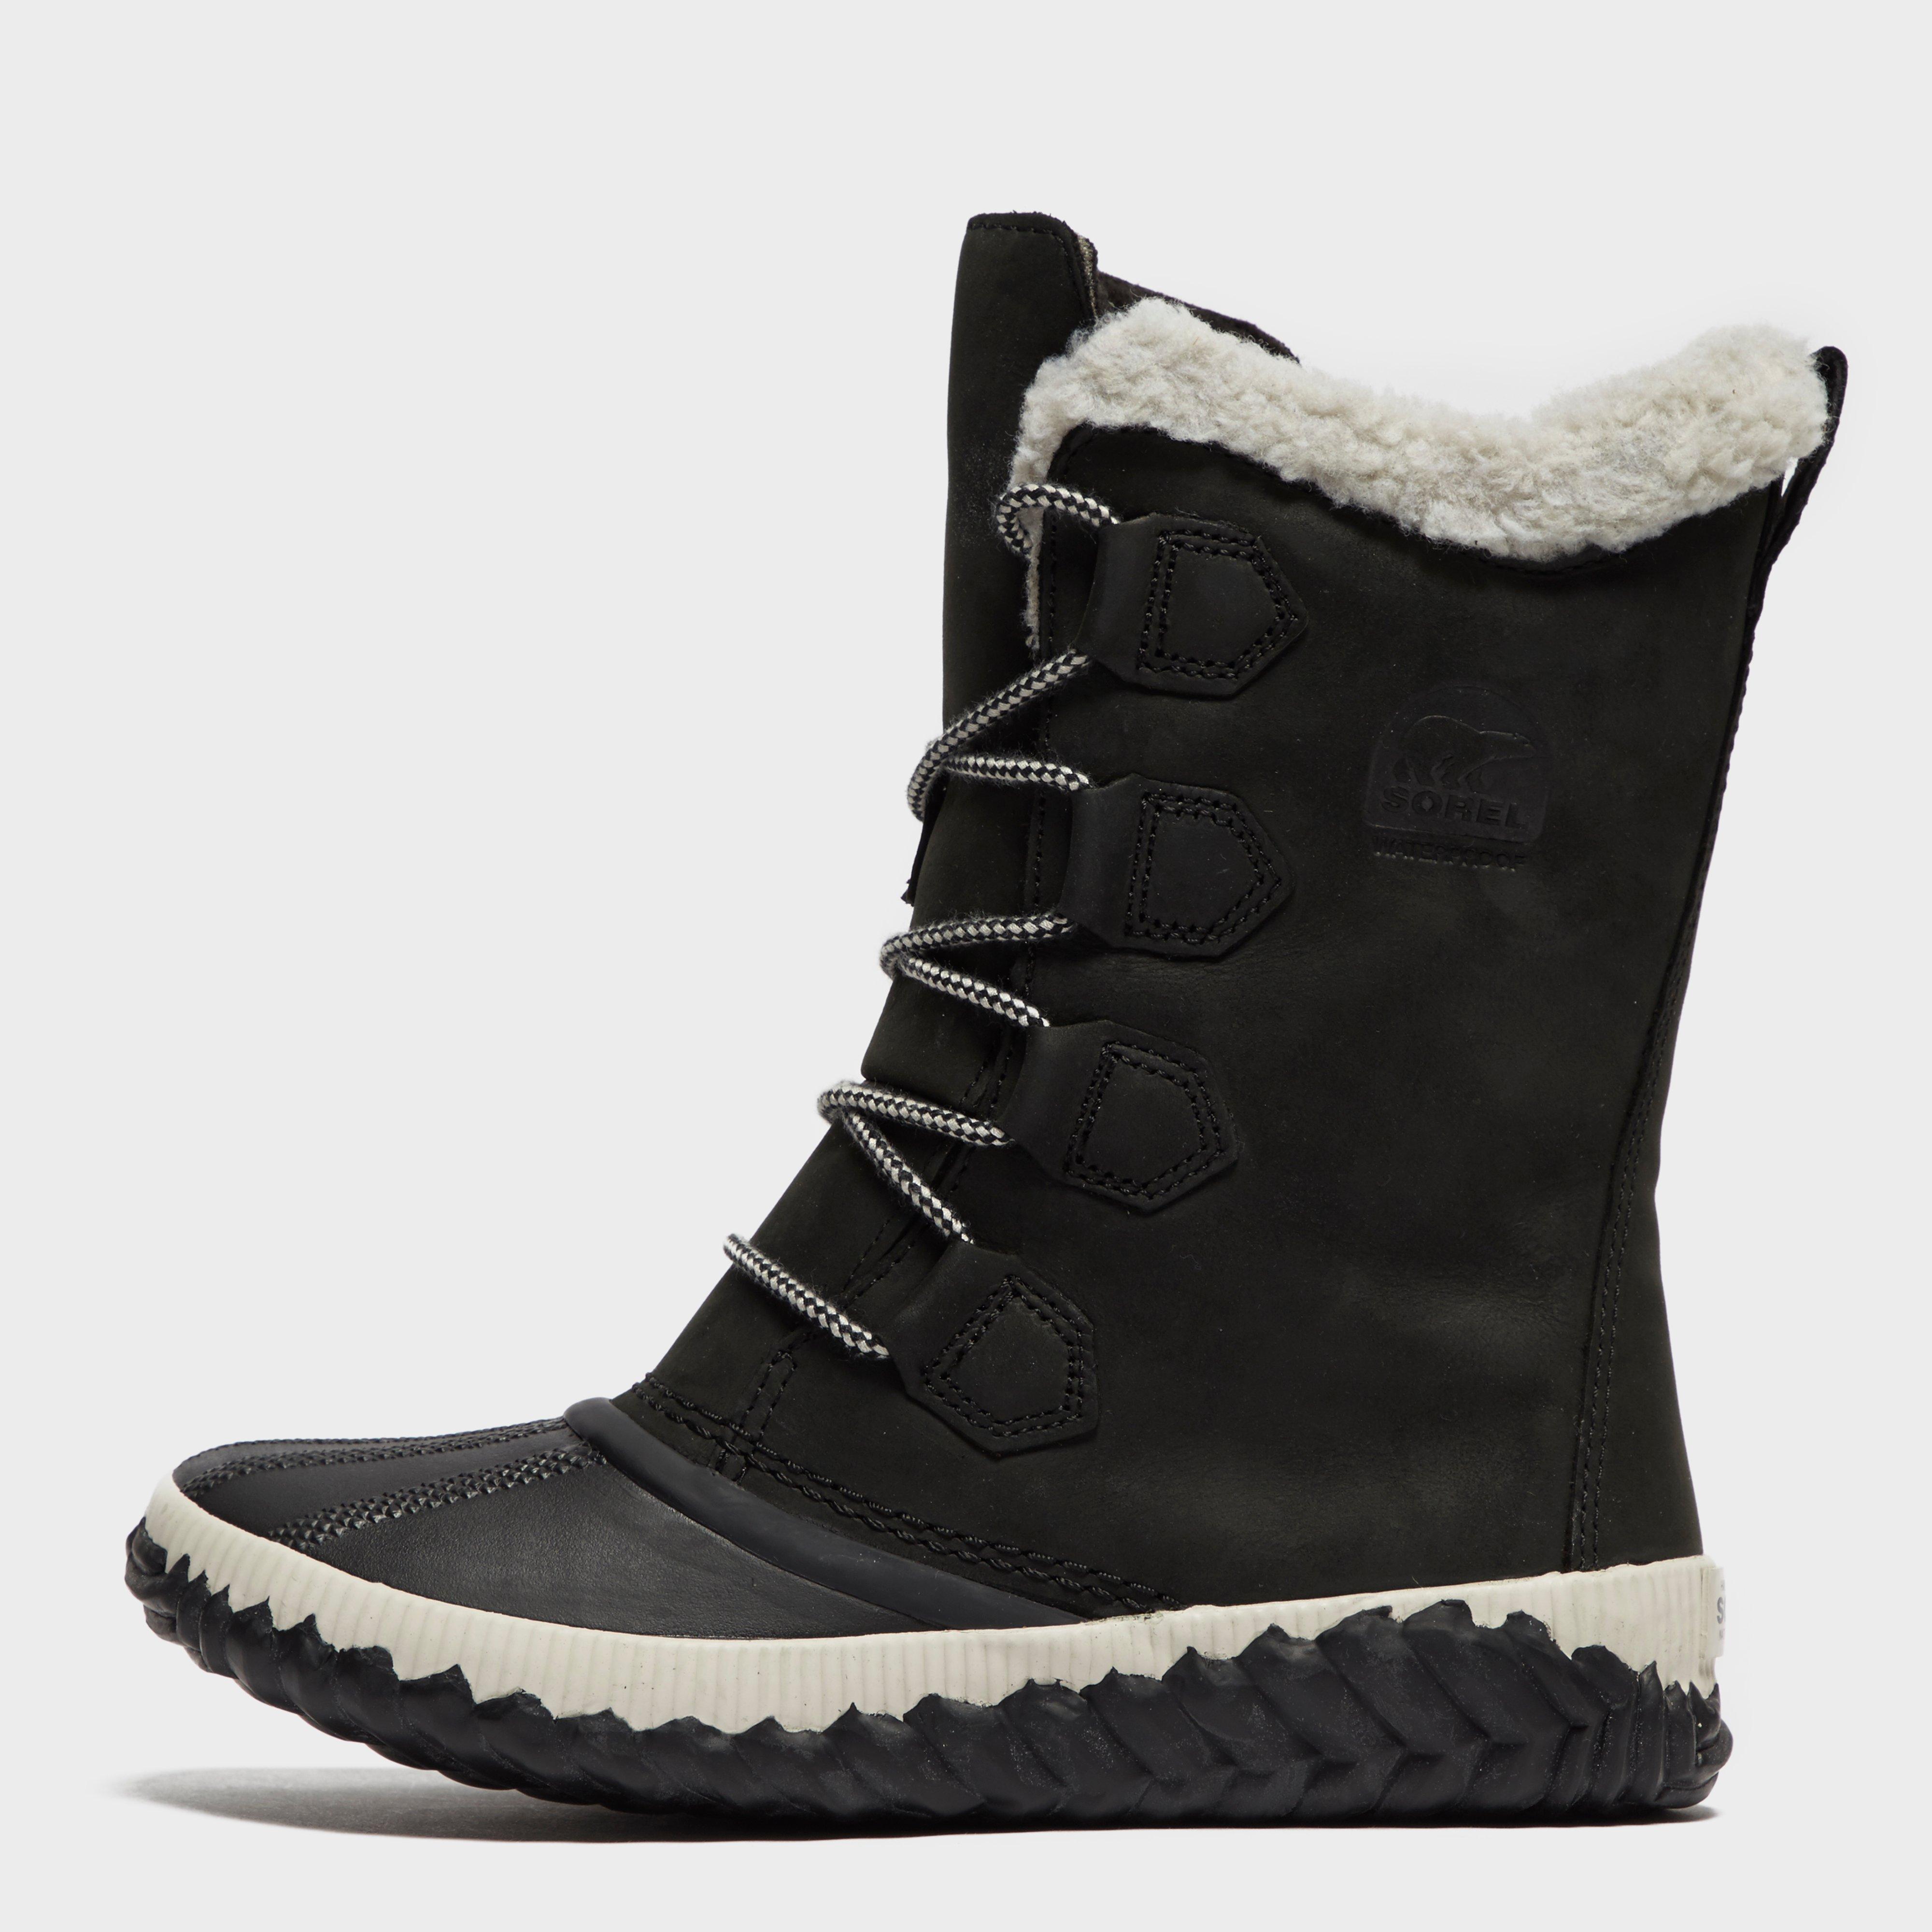 sorel women's out n about boots